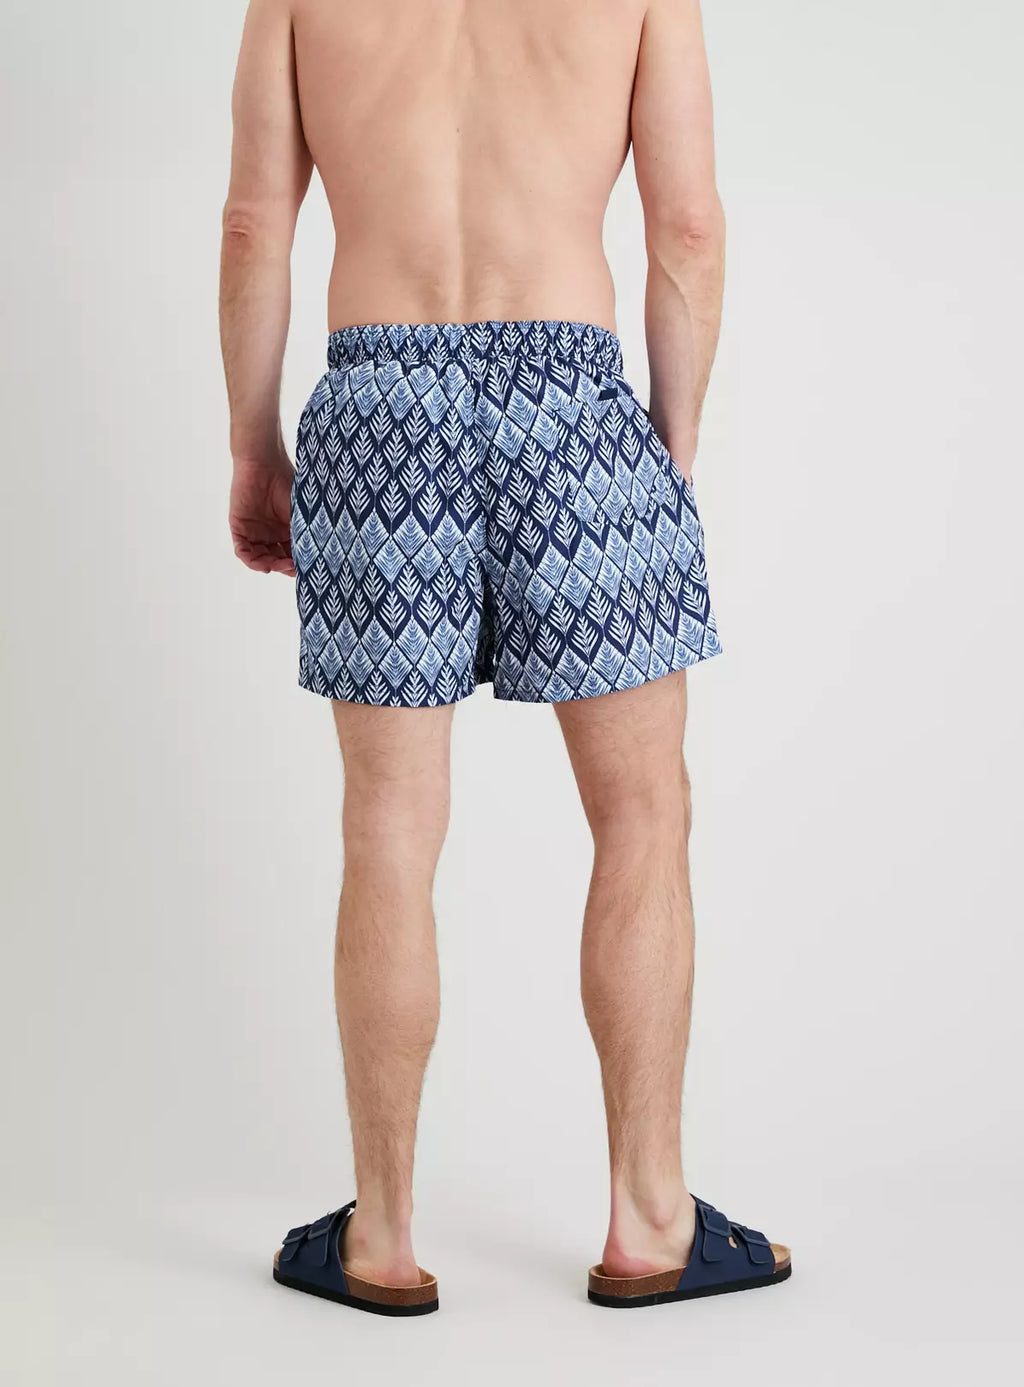 swimming shorts for men - the beach company online swimsuit shop india